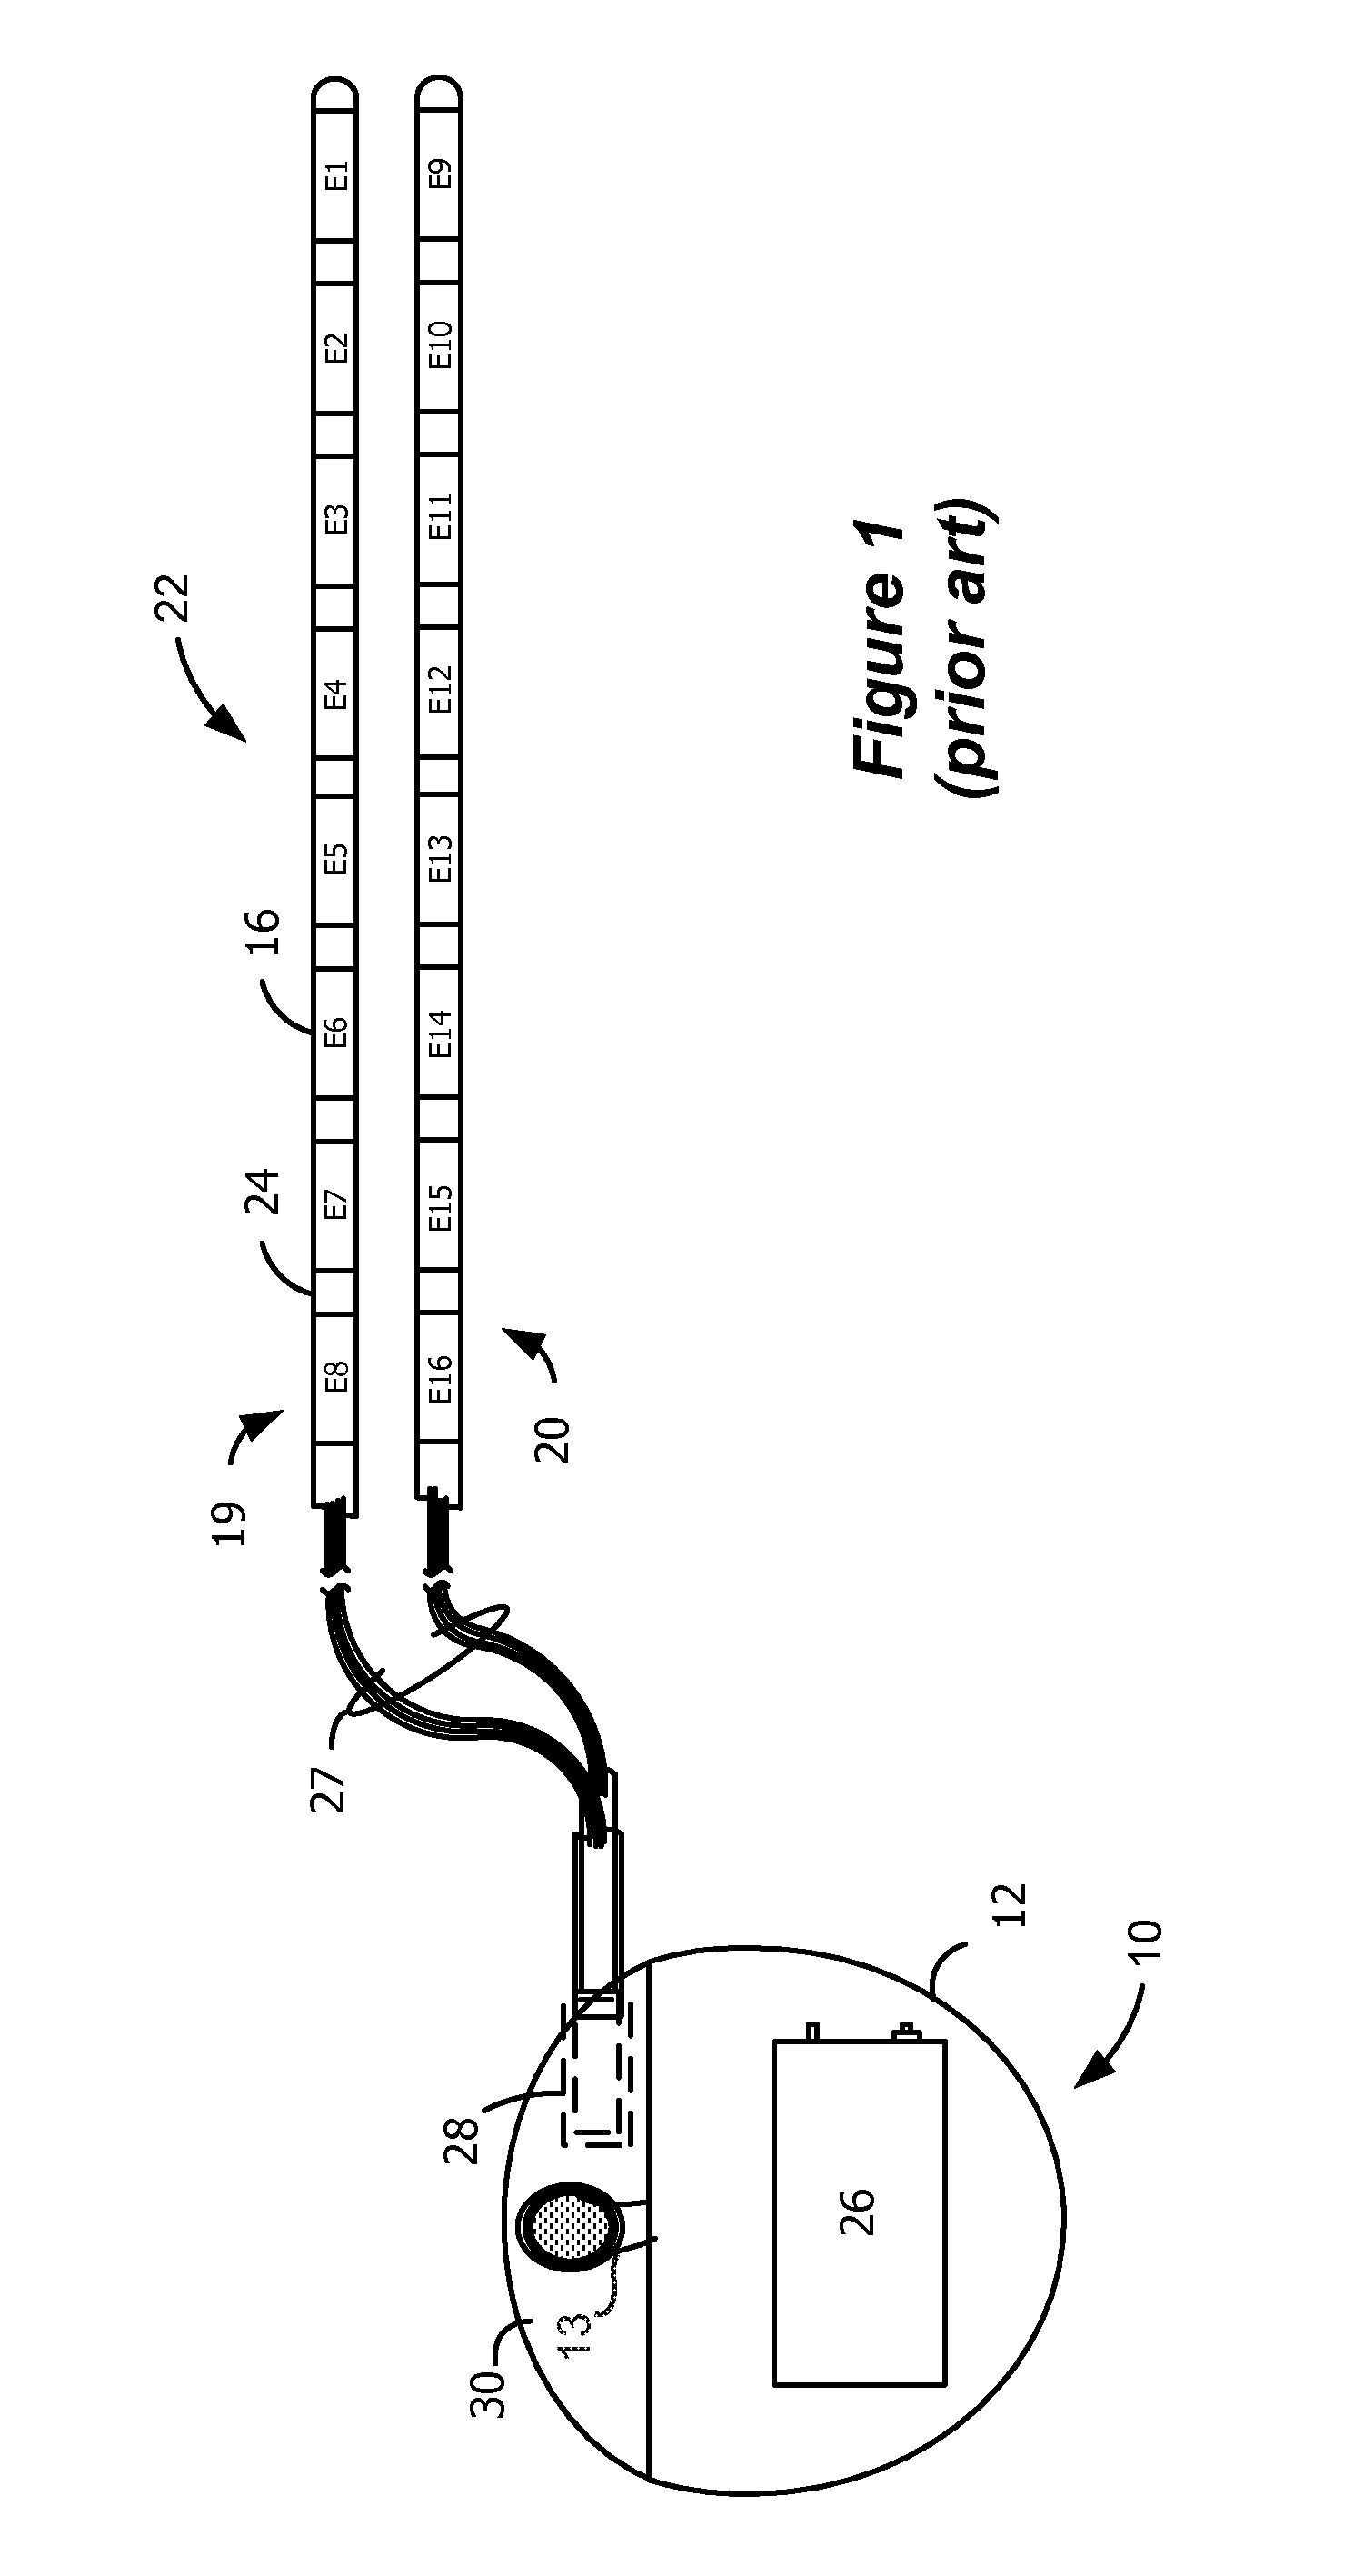 Integrated circuitry for generating a clock signal in an implantable medical device